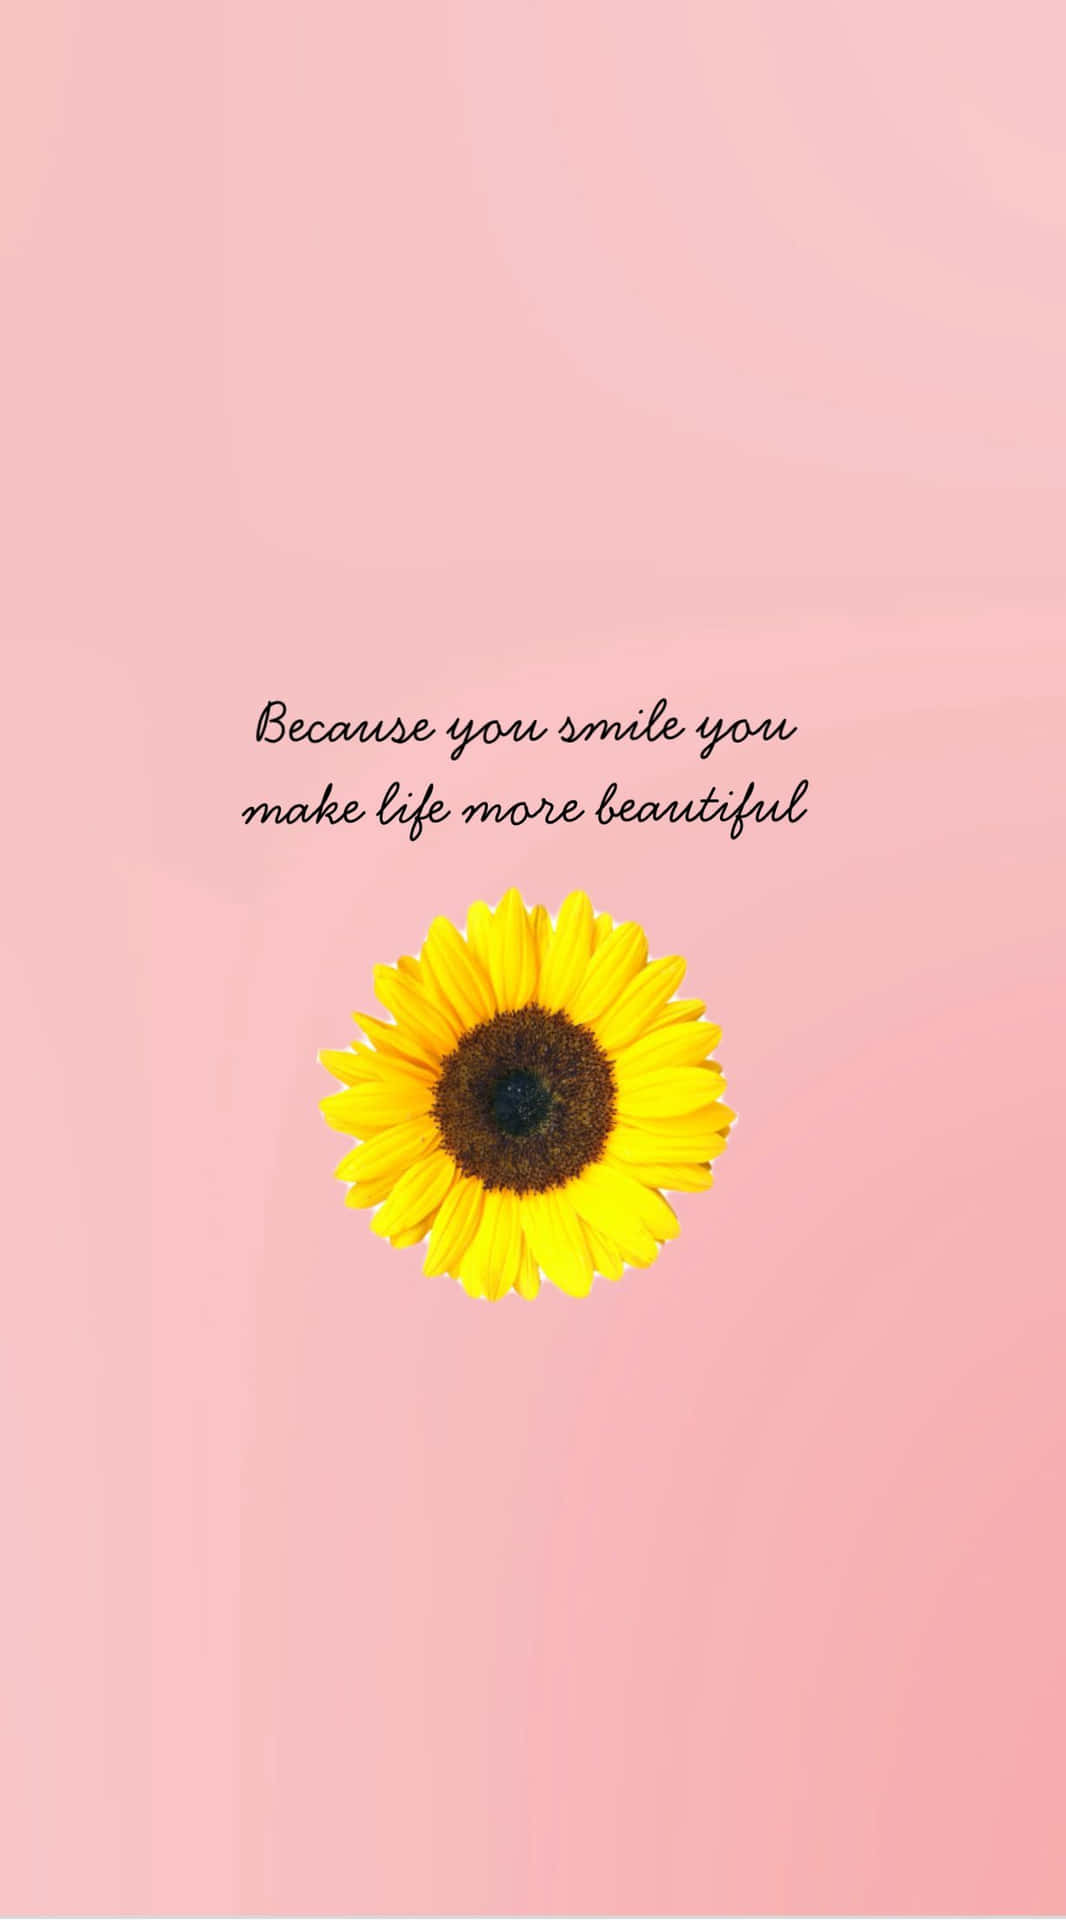 Aesthetic Peach Sunflower Quotes Wallpaper